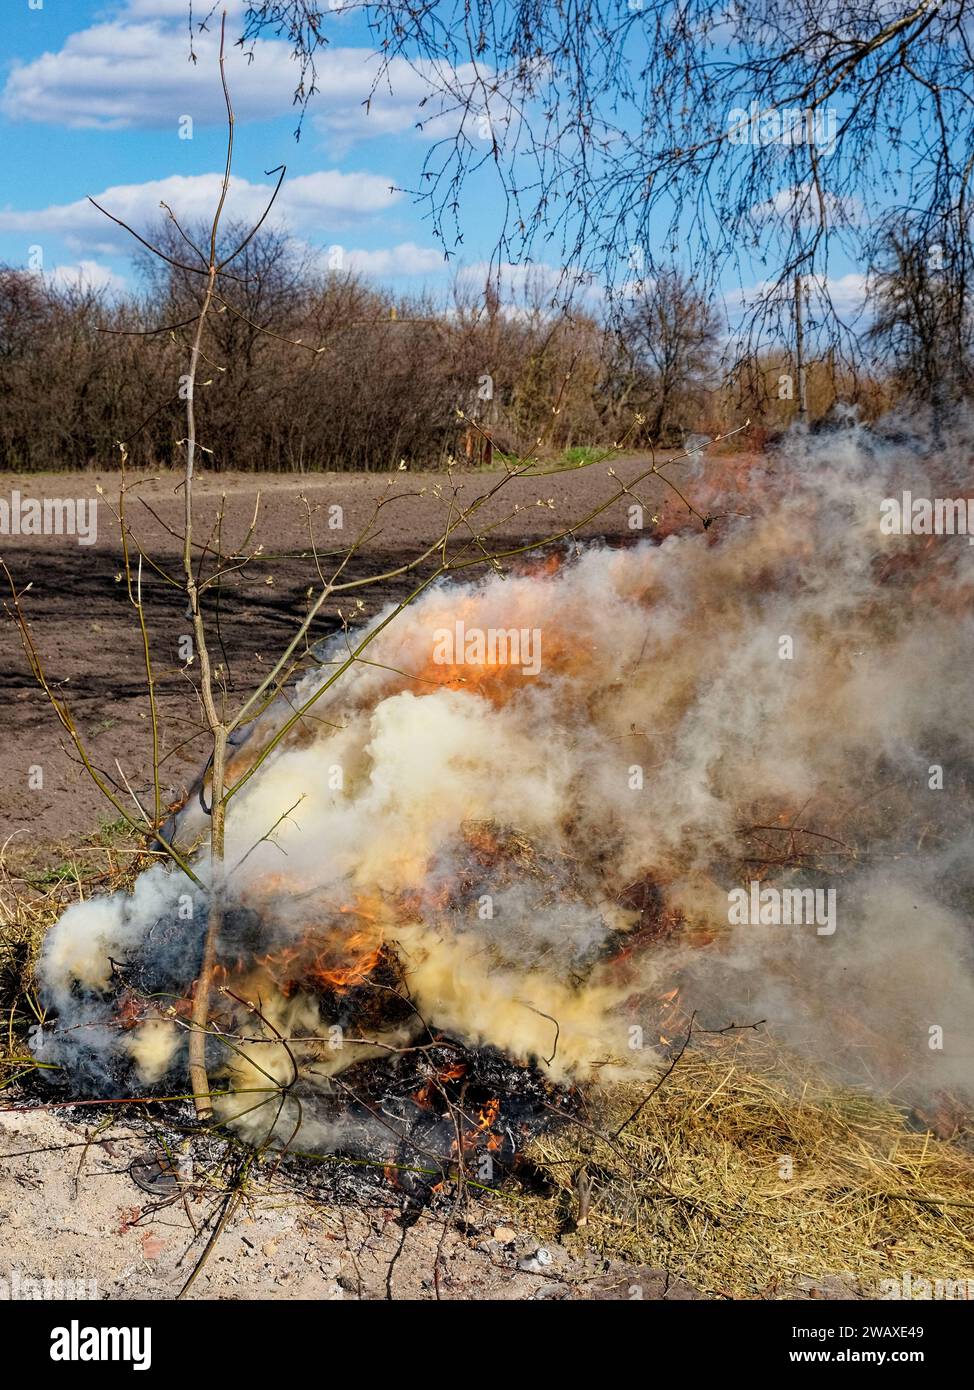 Flames and smoke rise from a burning pile. Illegal burning of leaves and dry grass. Stock Photo